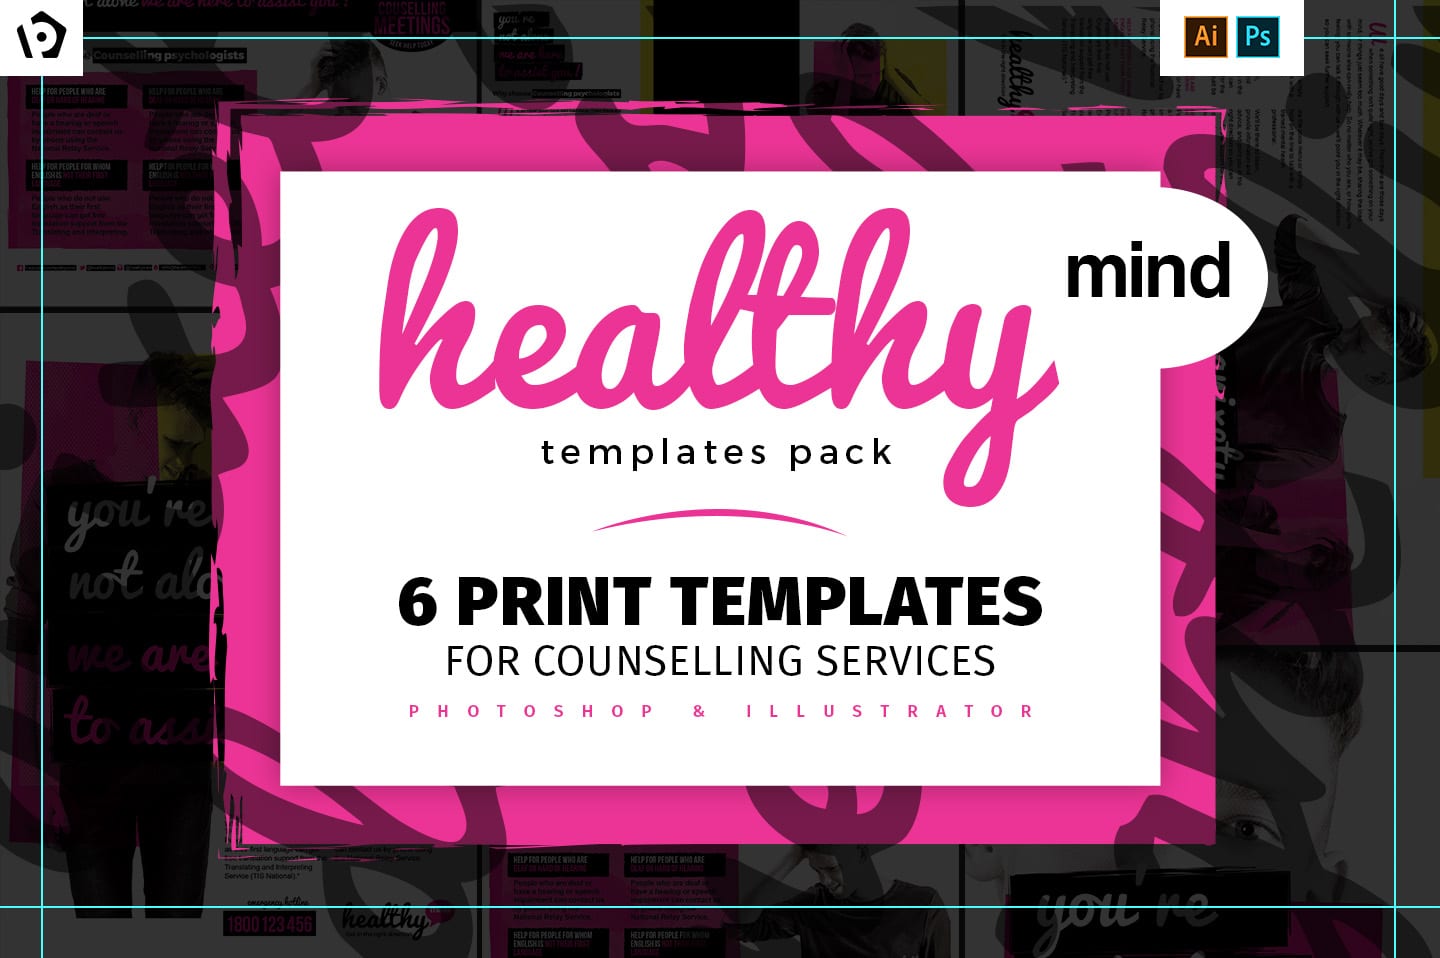 Healthy Mind Templates Pack